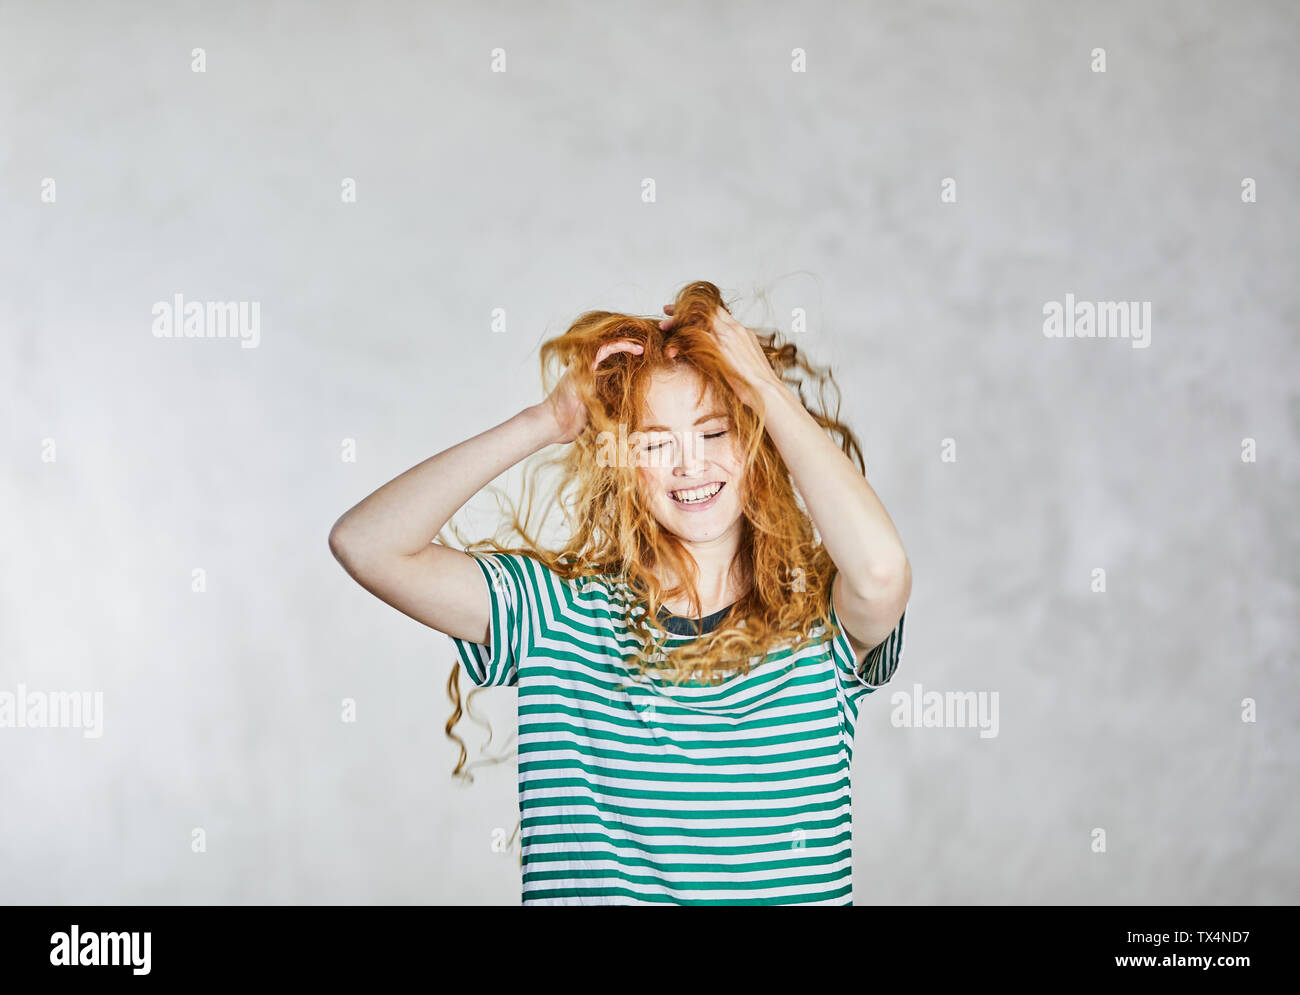 Portrait of redheaded young woman with hands in hair Stock Photo